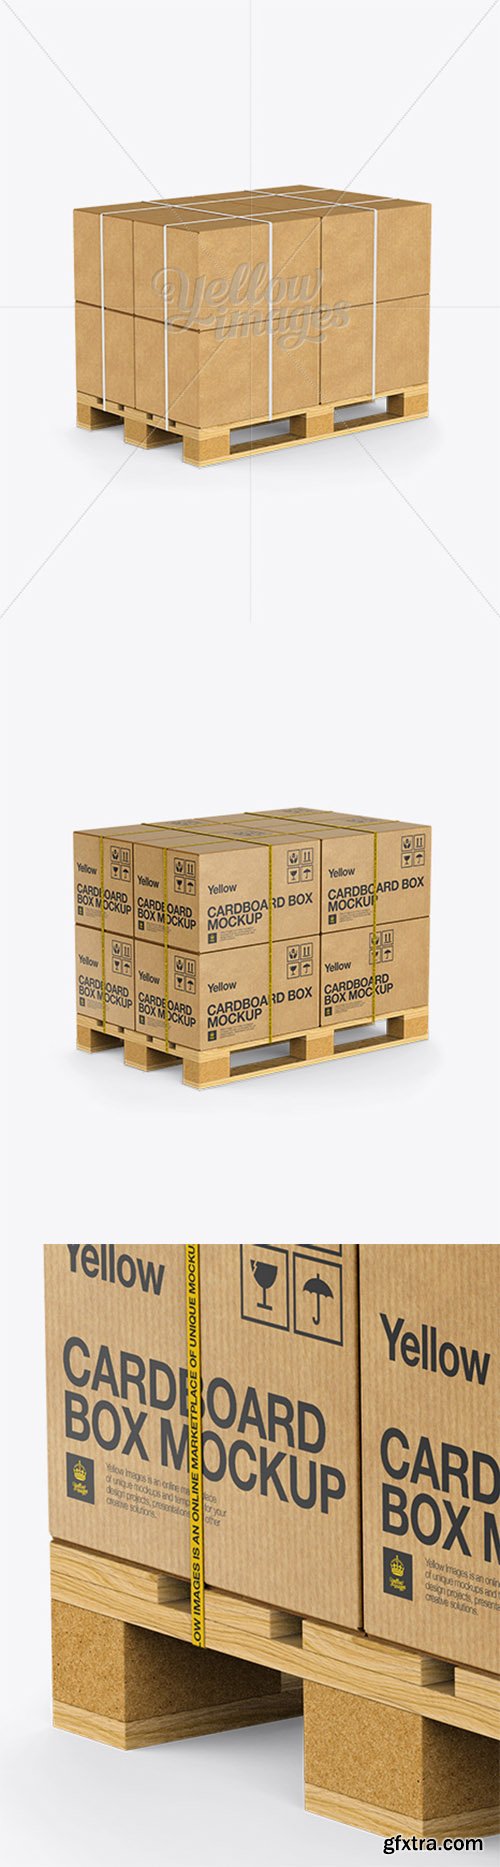 Wooden Pallet With 8 Cardboard Boxes Mockup - Halfside View 15734